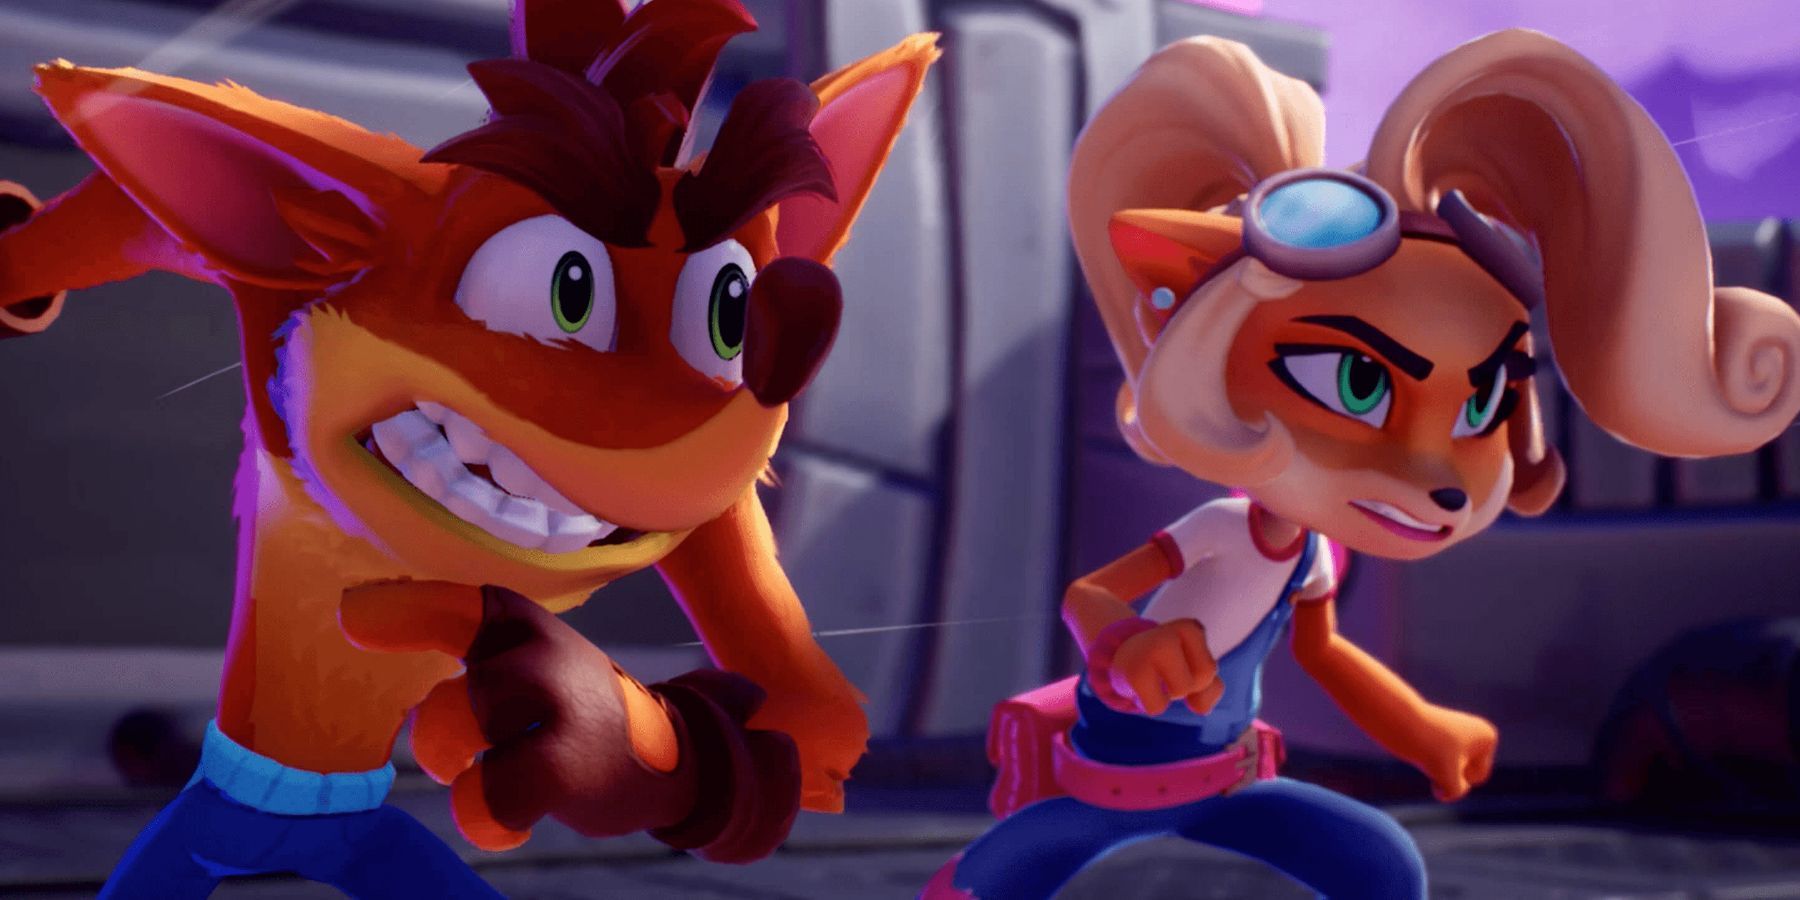 Crash and Coco about to attack an enemy off-screen